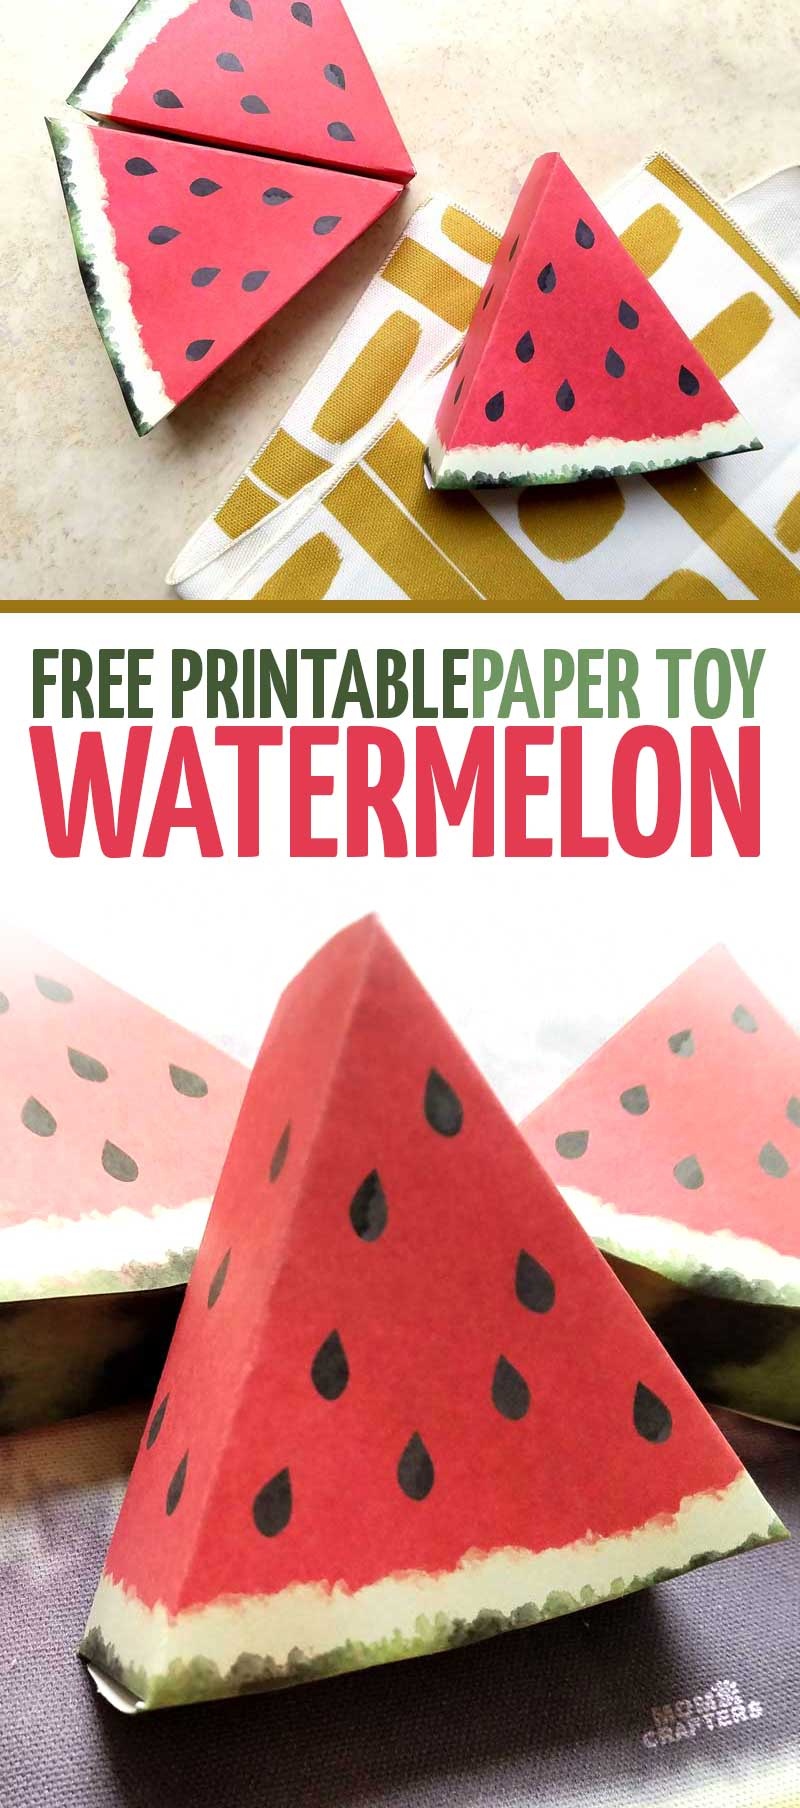 Paper Craft Templates For Play Fruit: Watermelon * Moms And Crafters - Free Printable Paper Crafts